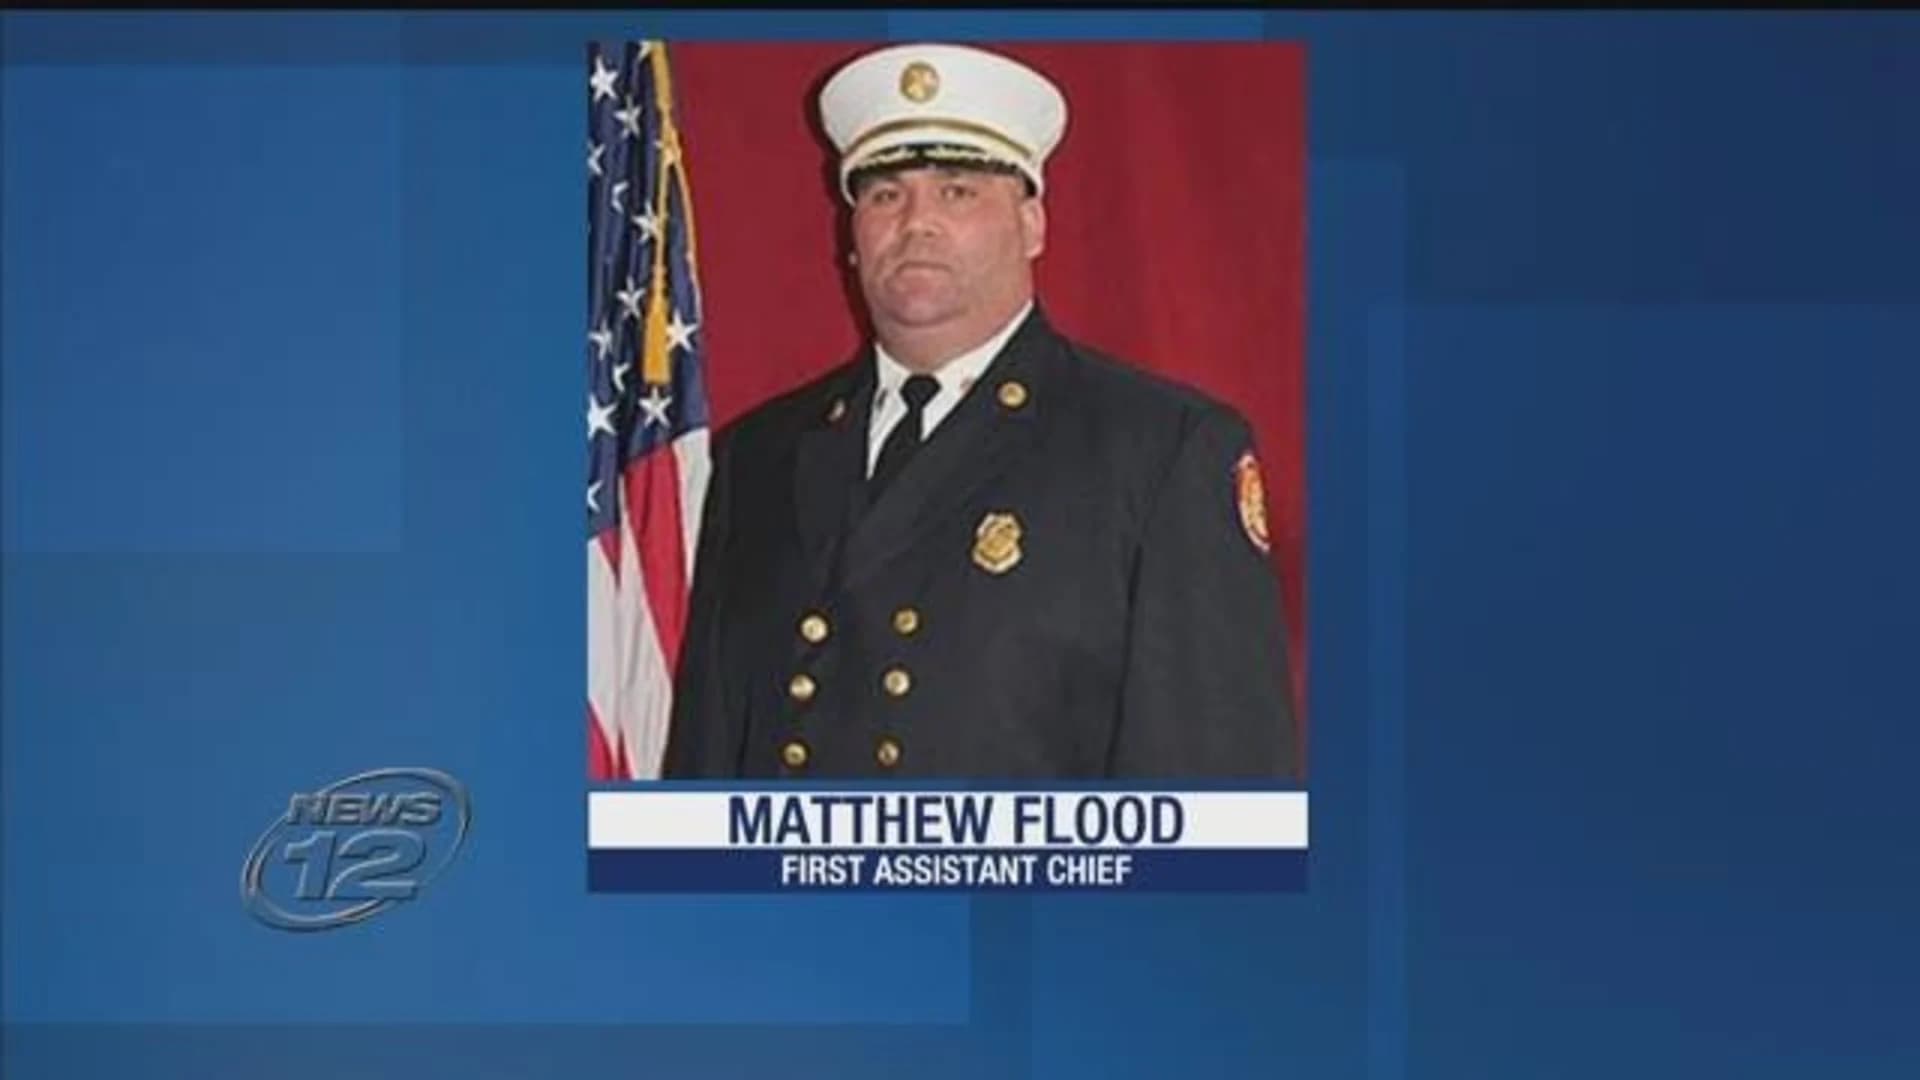 Garden City Park assistant fire chief ordered to stay away from family